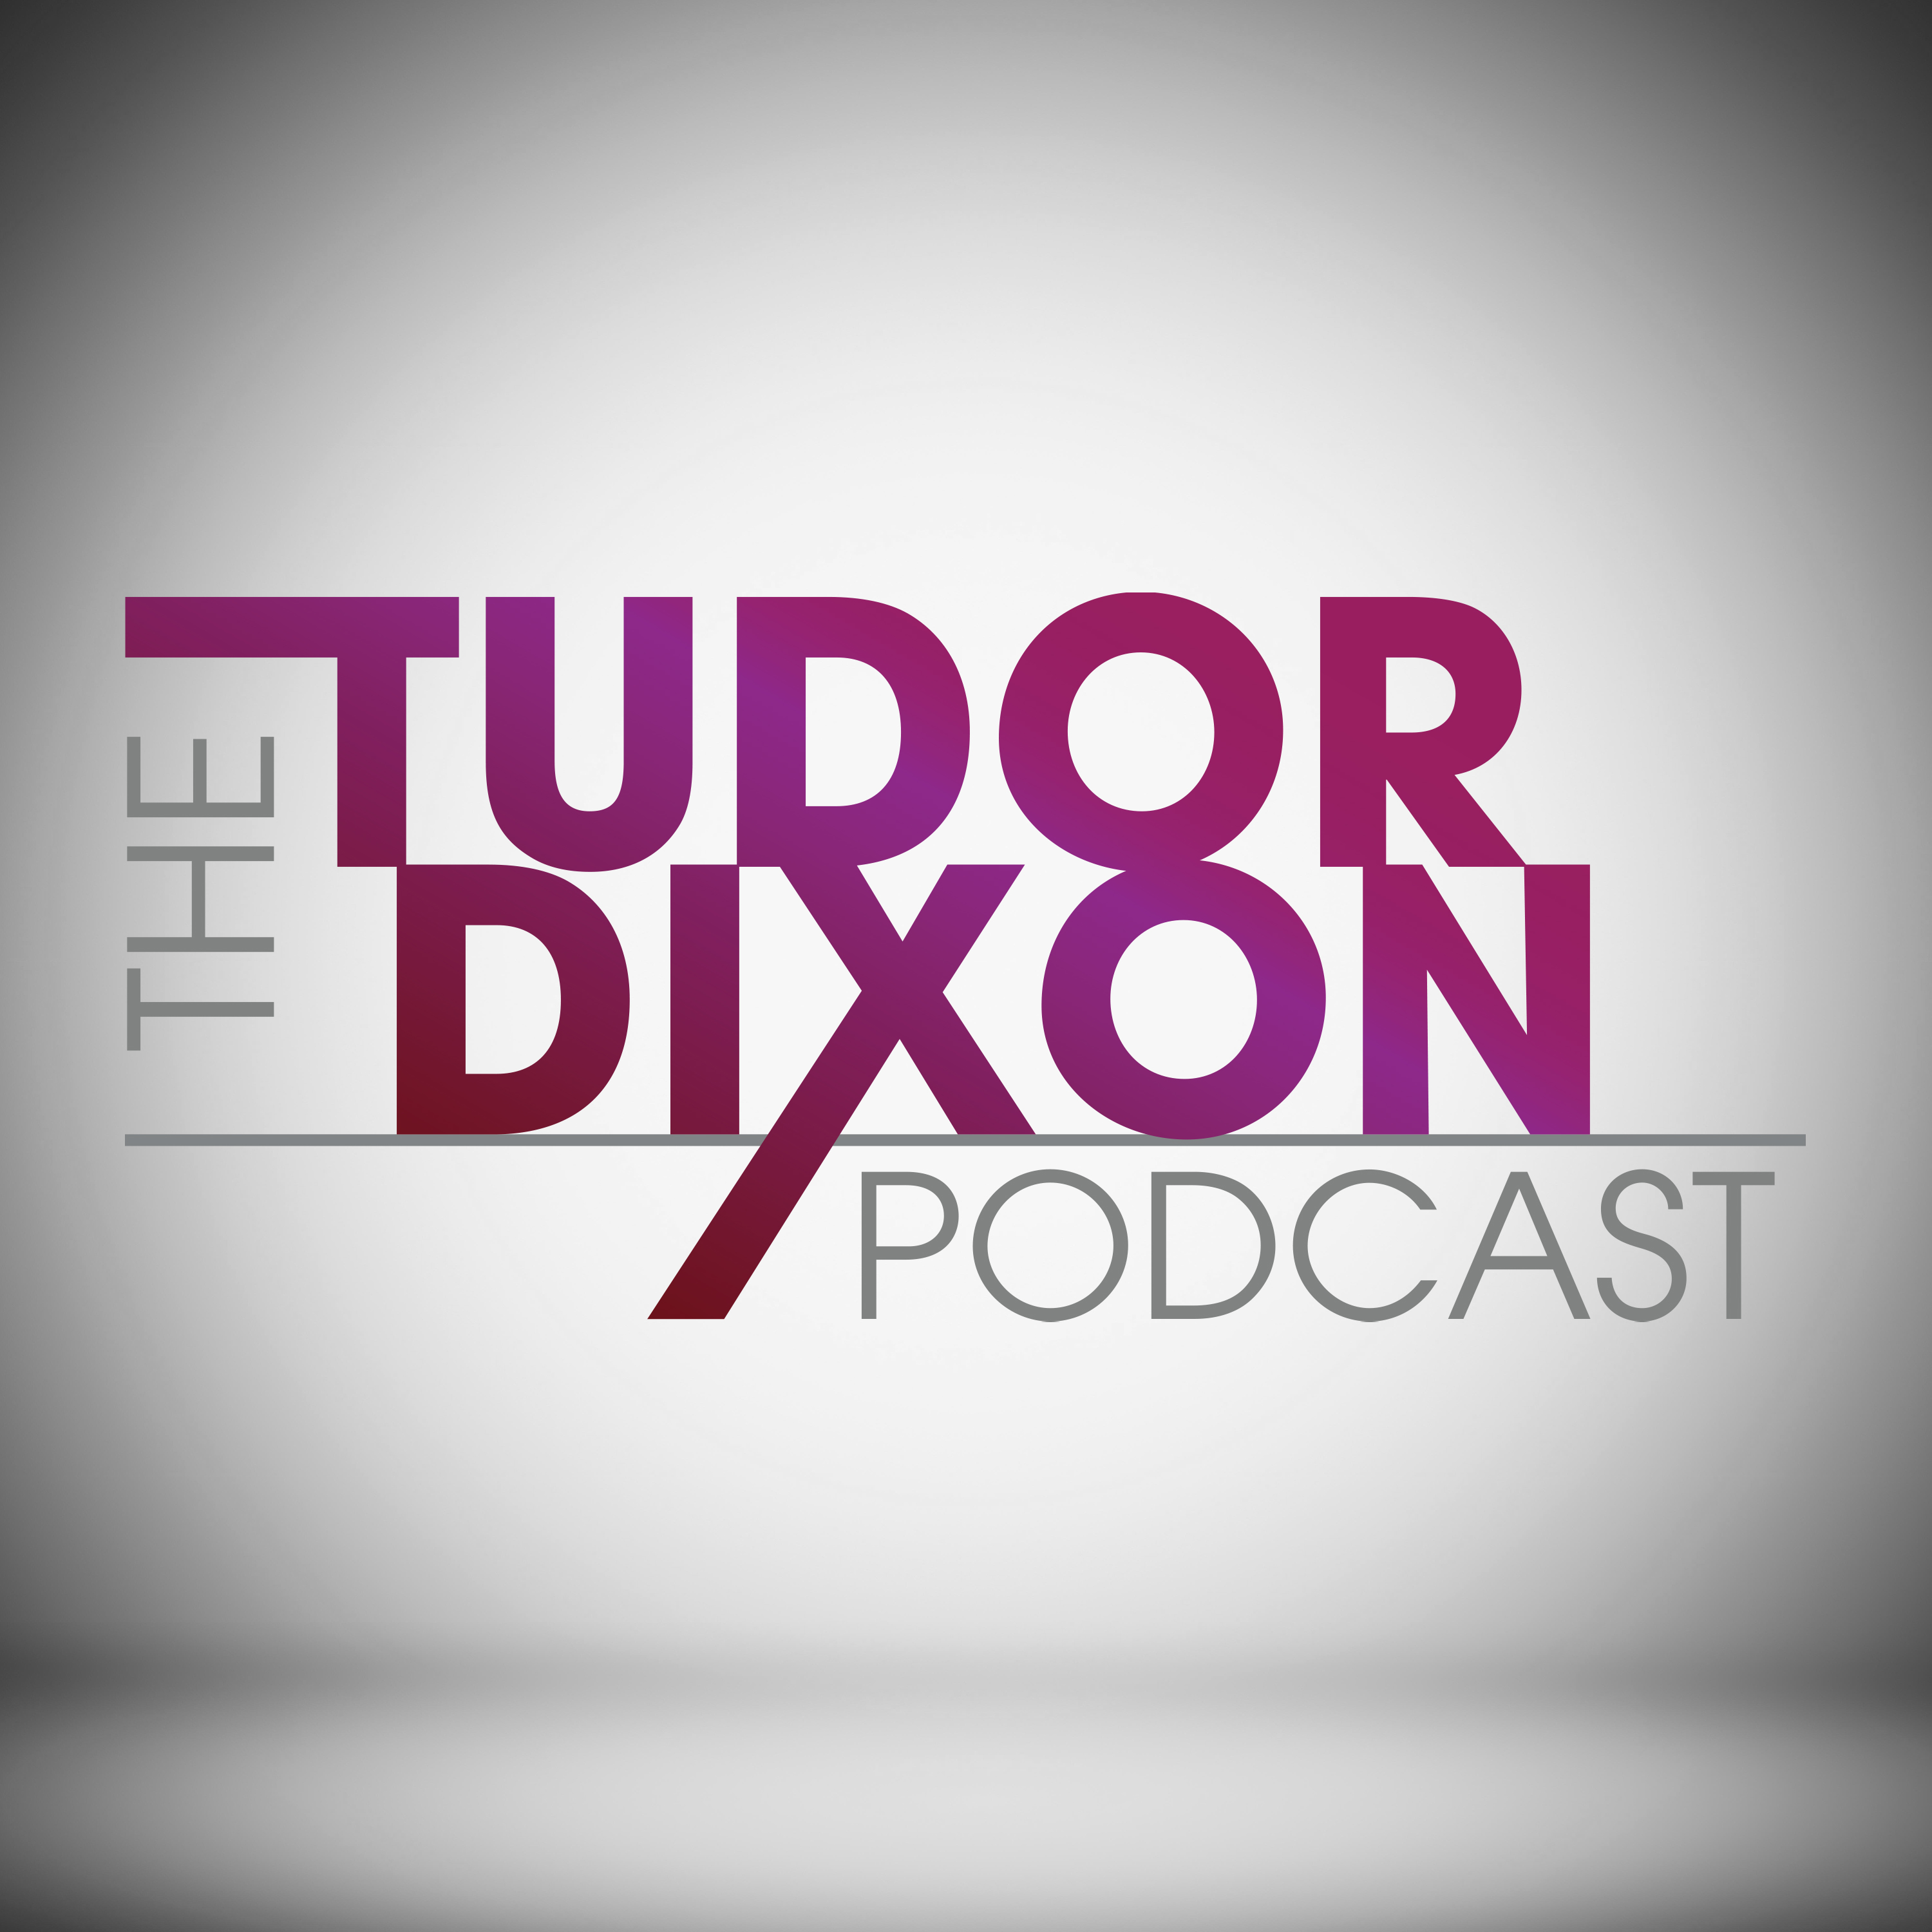 The Tudor Dixon Podcast: Protecting Our Children with Maureen Flatley